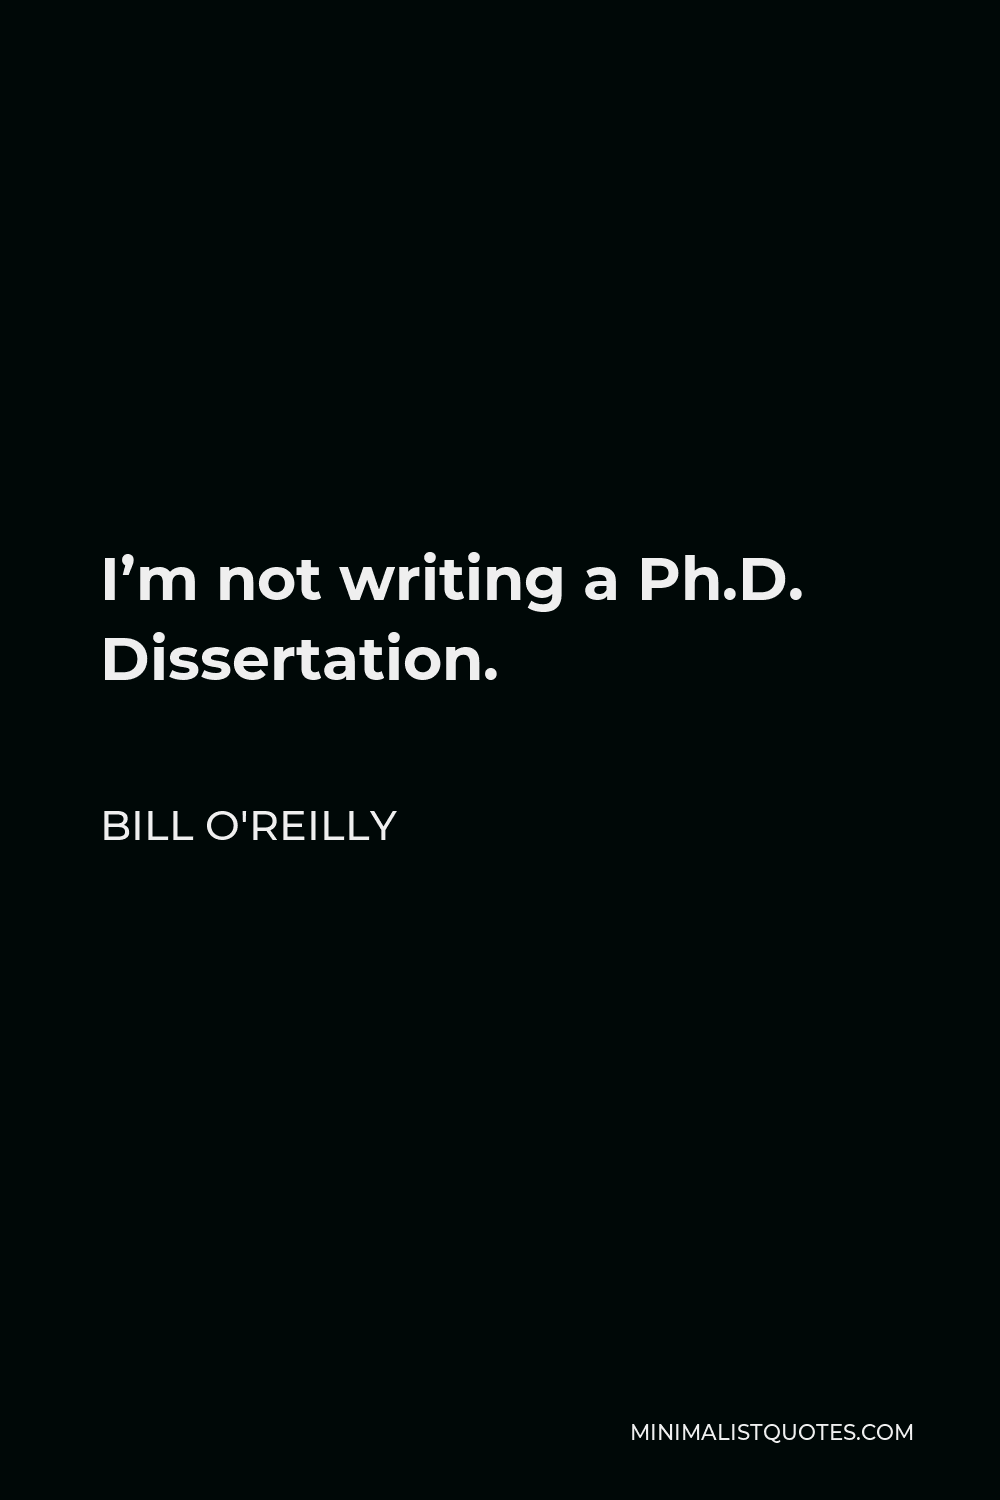 Bill O'Reilly Quote - I’m not writing a Ph.D. Dissertation.